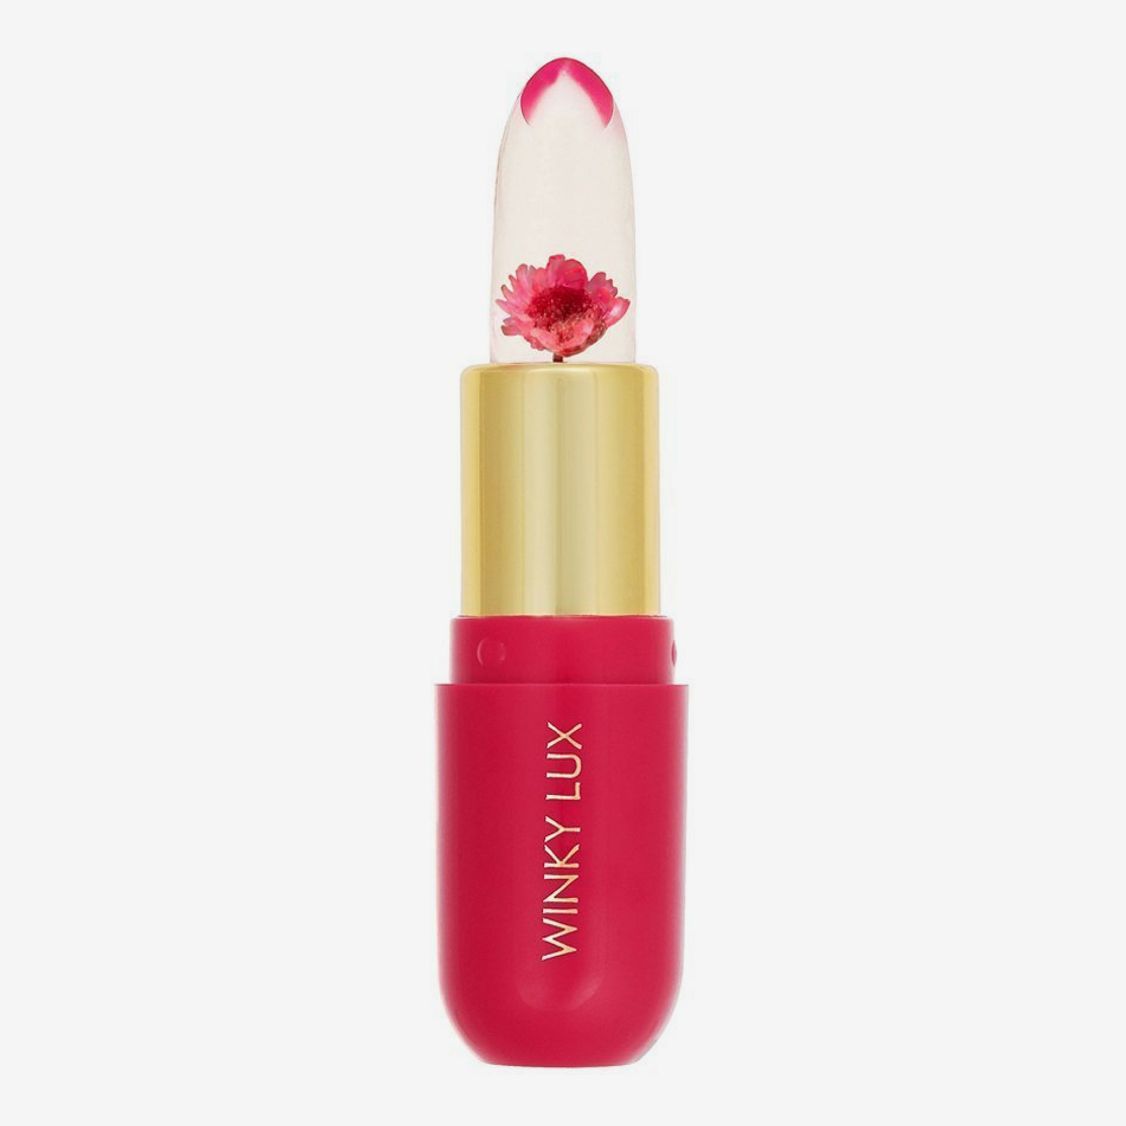 Winky Lux Flower Balm Review 2019 | The Strategist